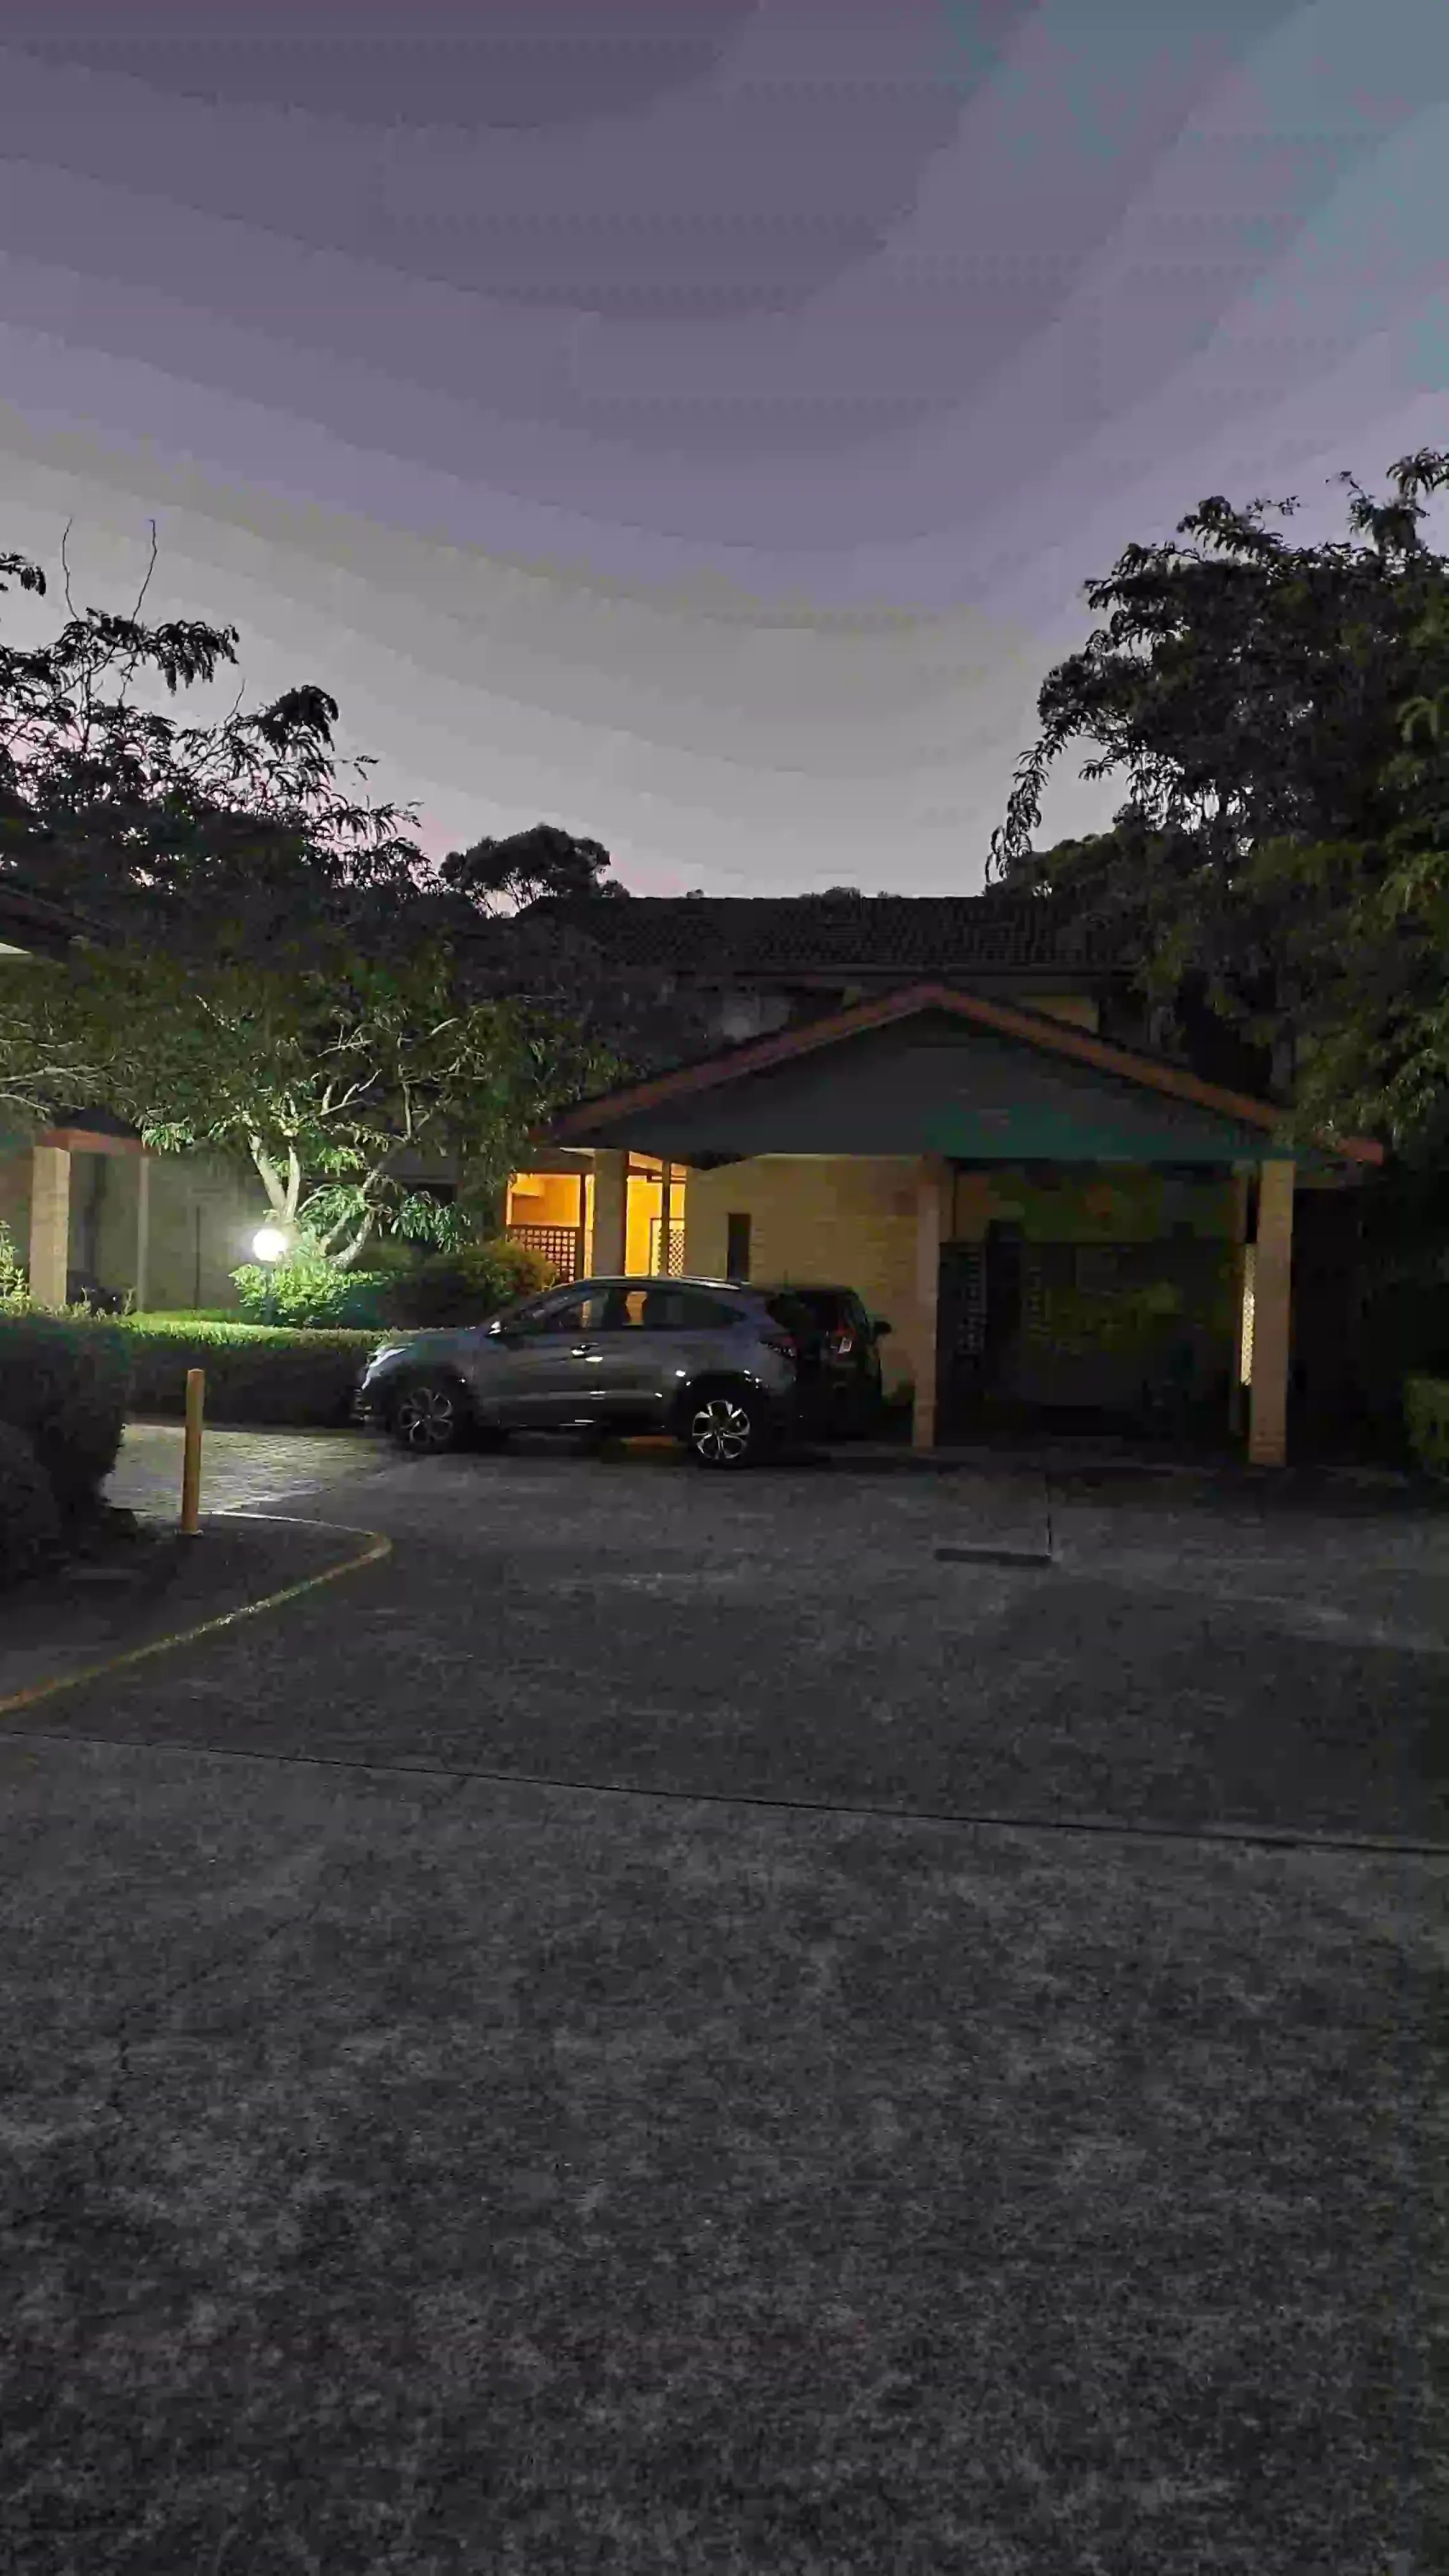 SP52948-persistent-illegal-parking-near-townhouse-202-in-spite-of-free-slots-in-carpark-photo-2-15Feb2022.webp